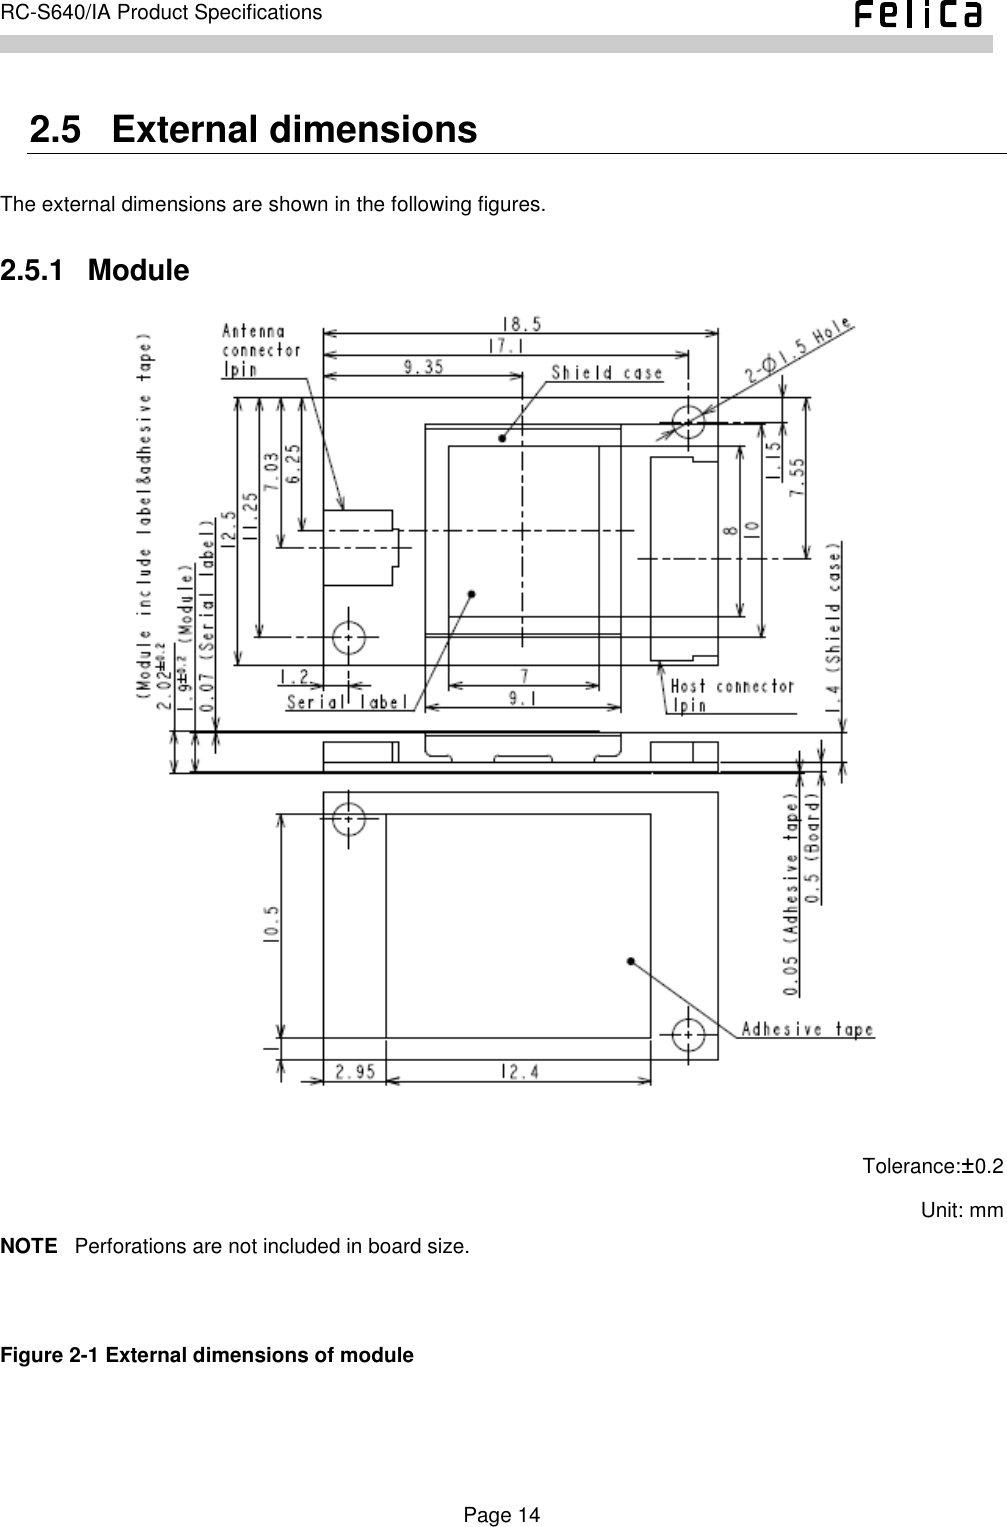    Page 14     RC-S640/IA Product Specifications    2.5   External dimensions The external dimensions are shown in the following figures. 2.5.1   Module   Tolerance:±0.2 Unit: mm NOTE  Perforations are not included in board size.   Figure 2-1 External dimensions of module   